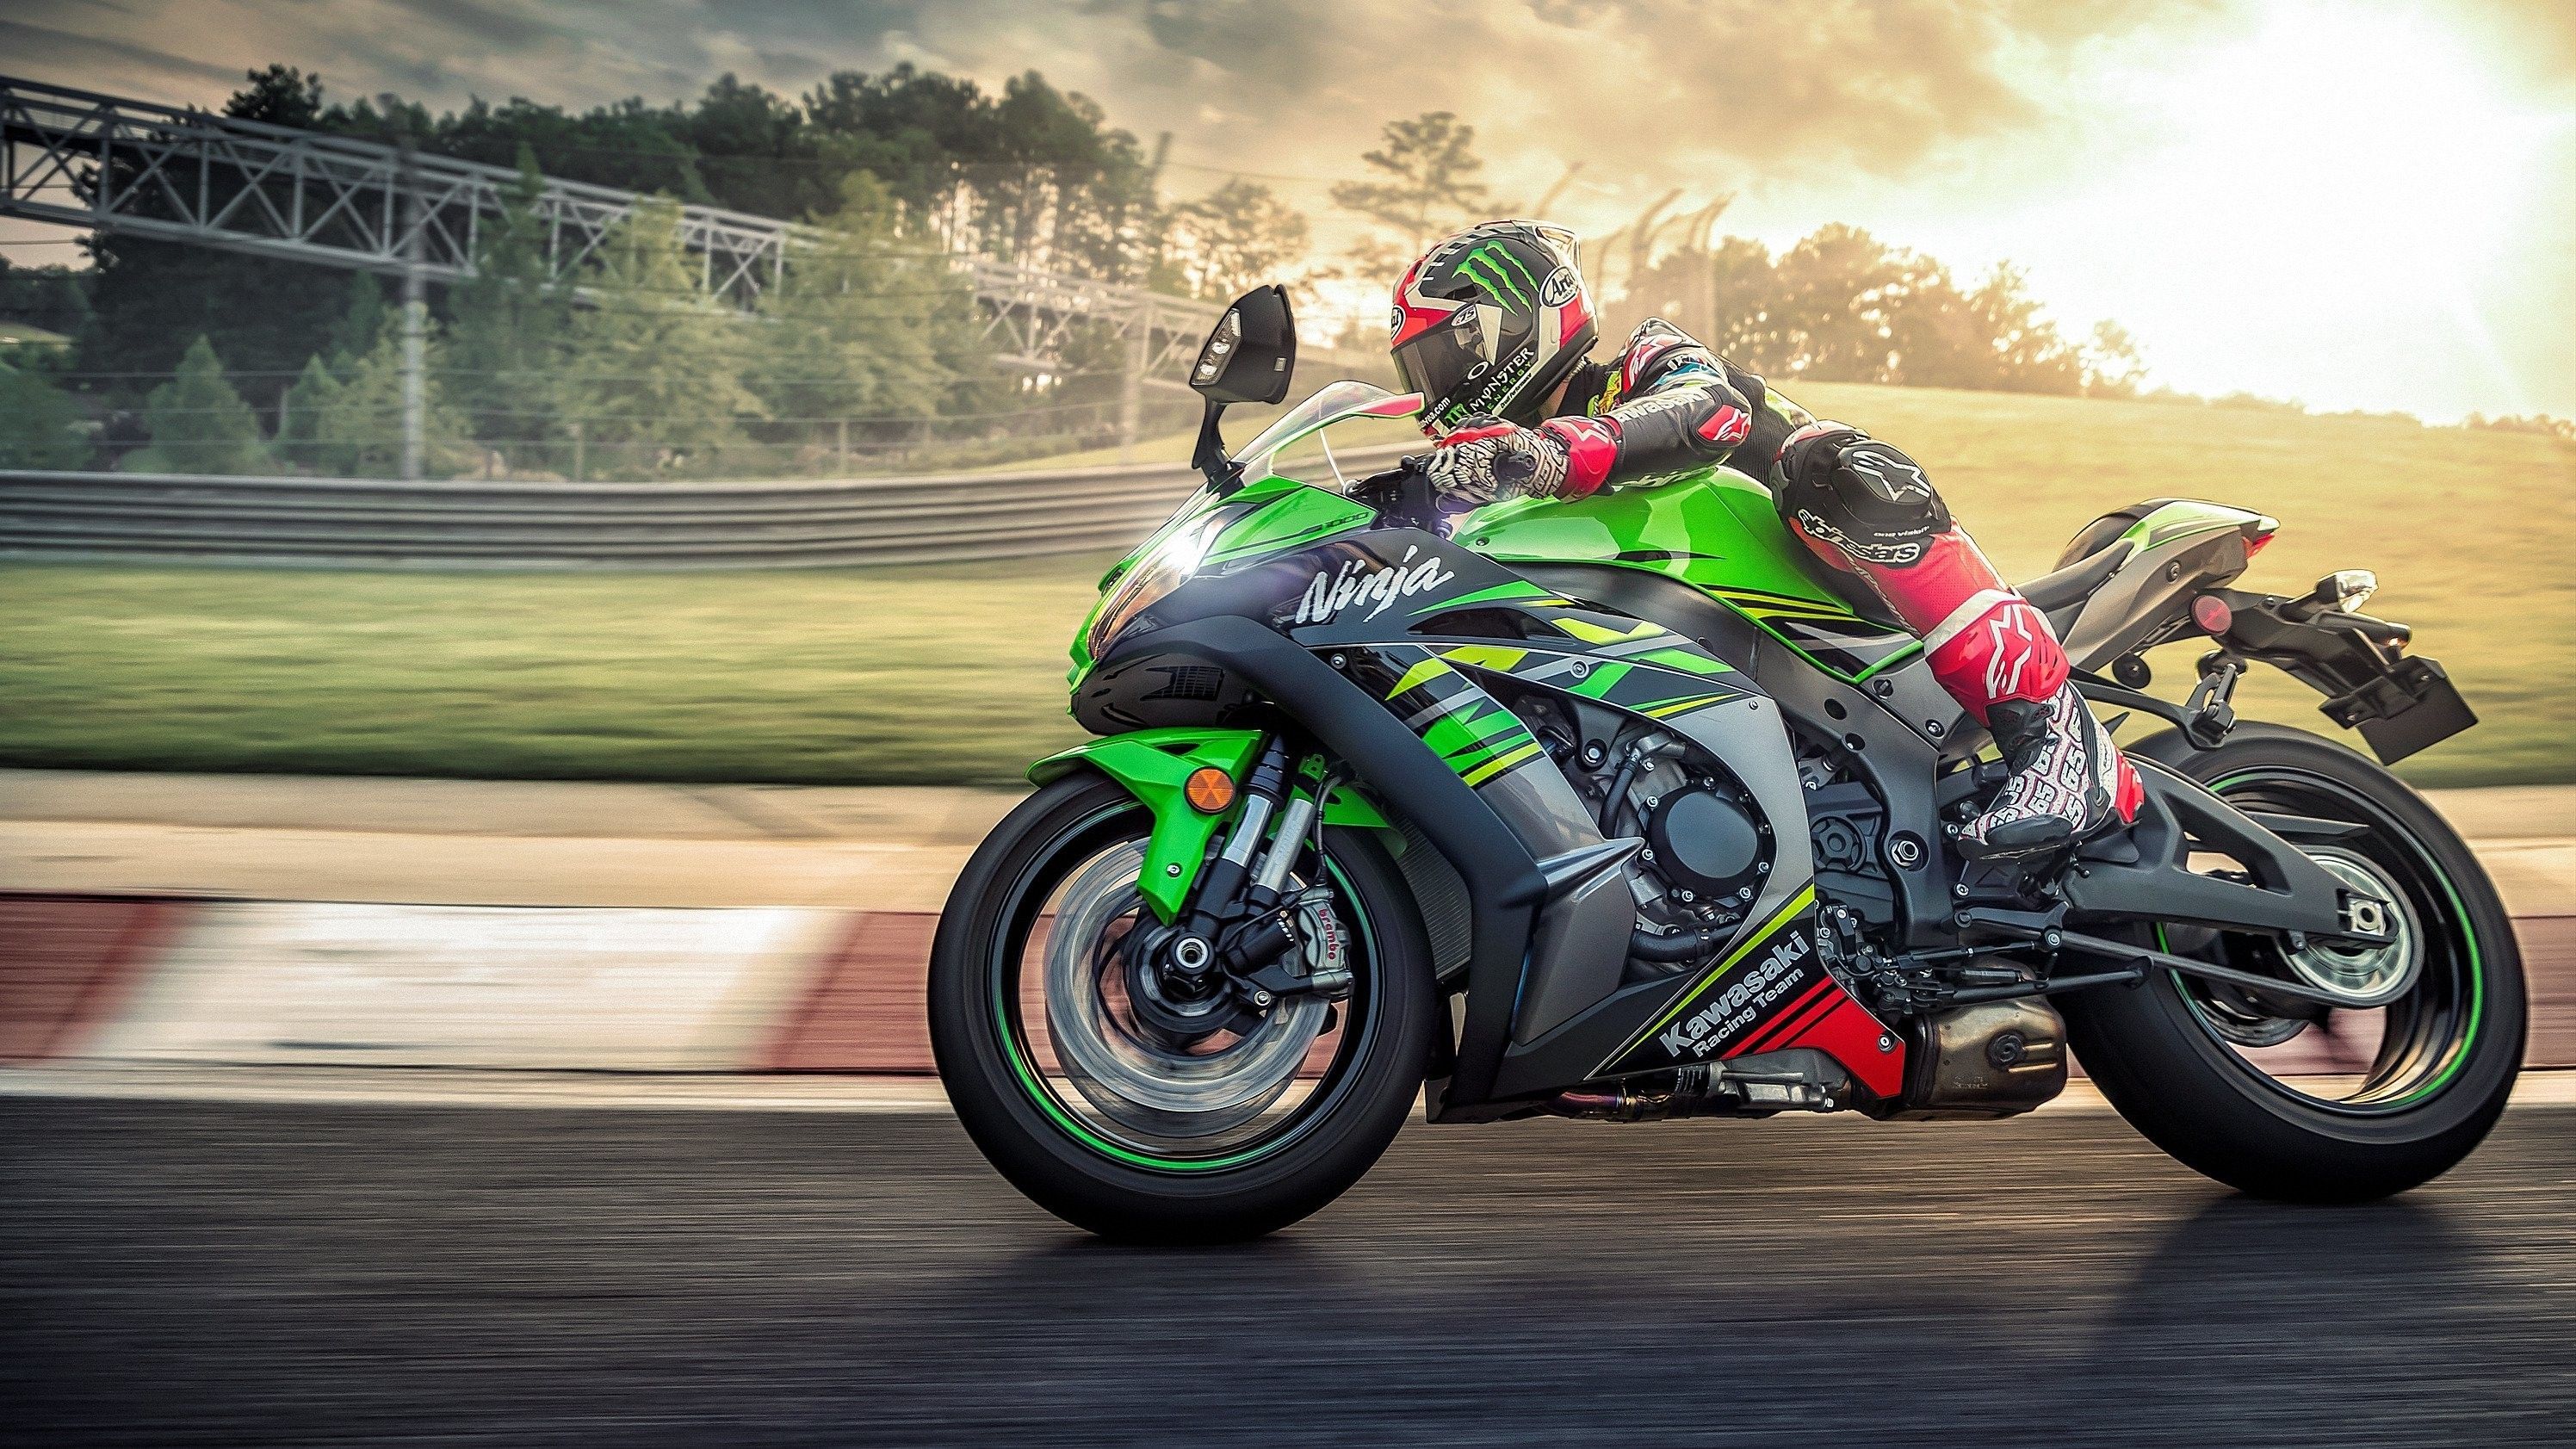 ZX10R 2020 Wallpapers - Wallpaper Cave